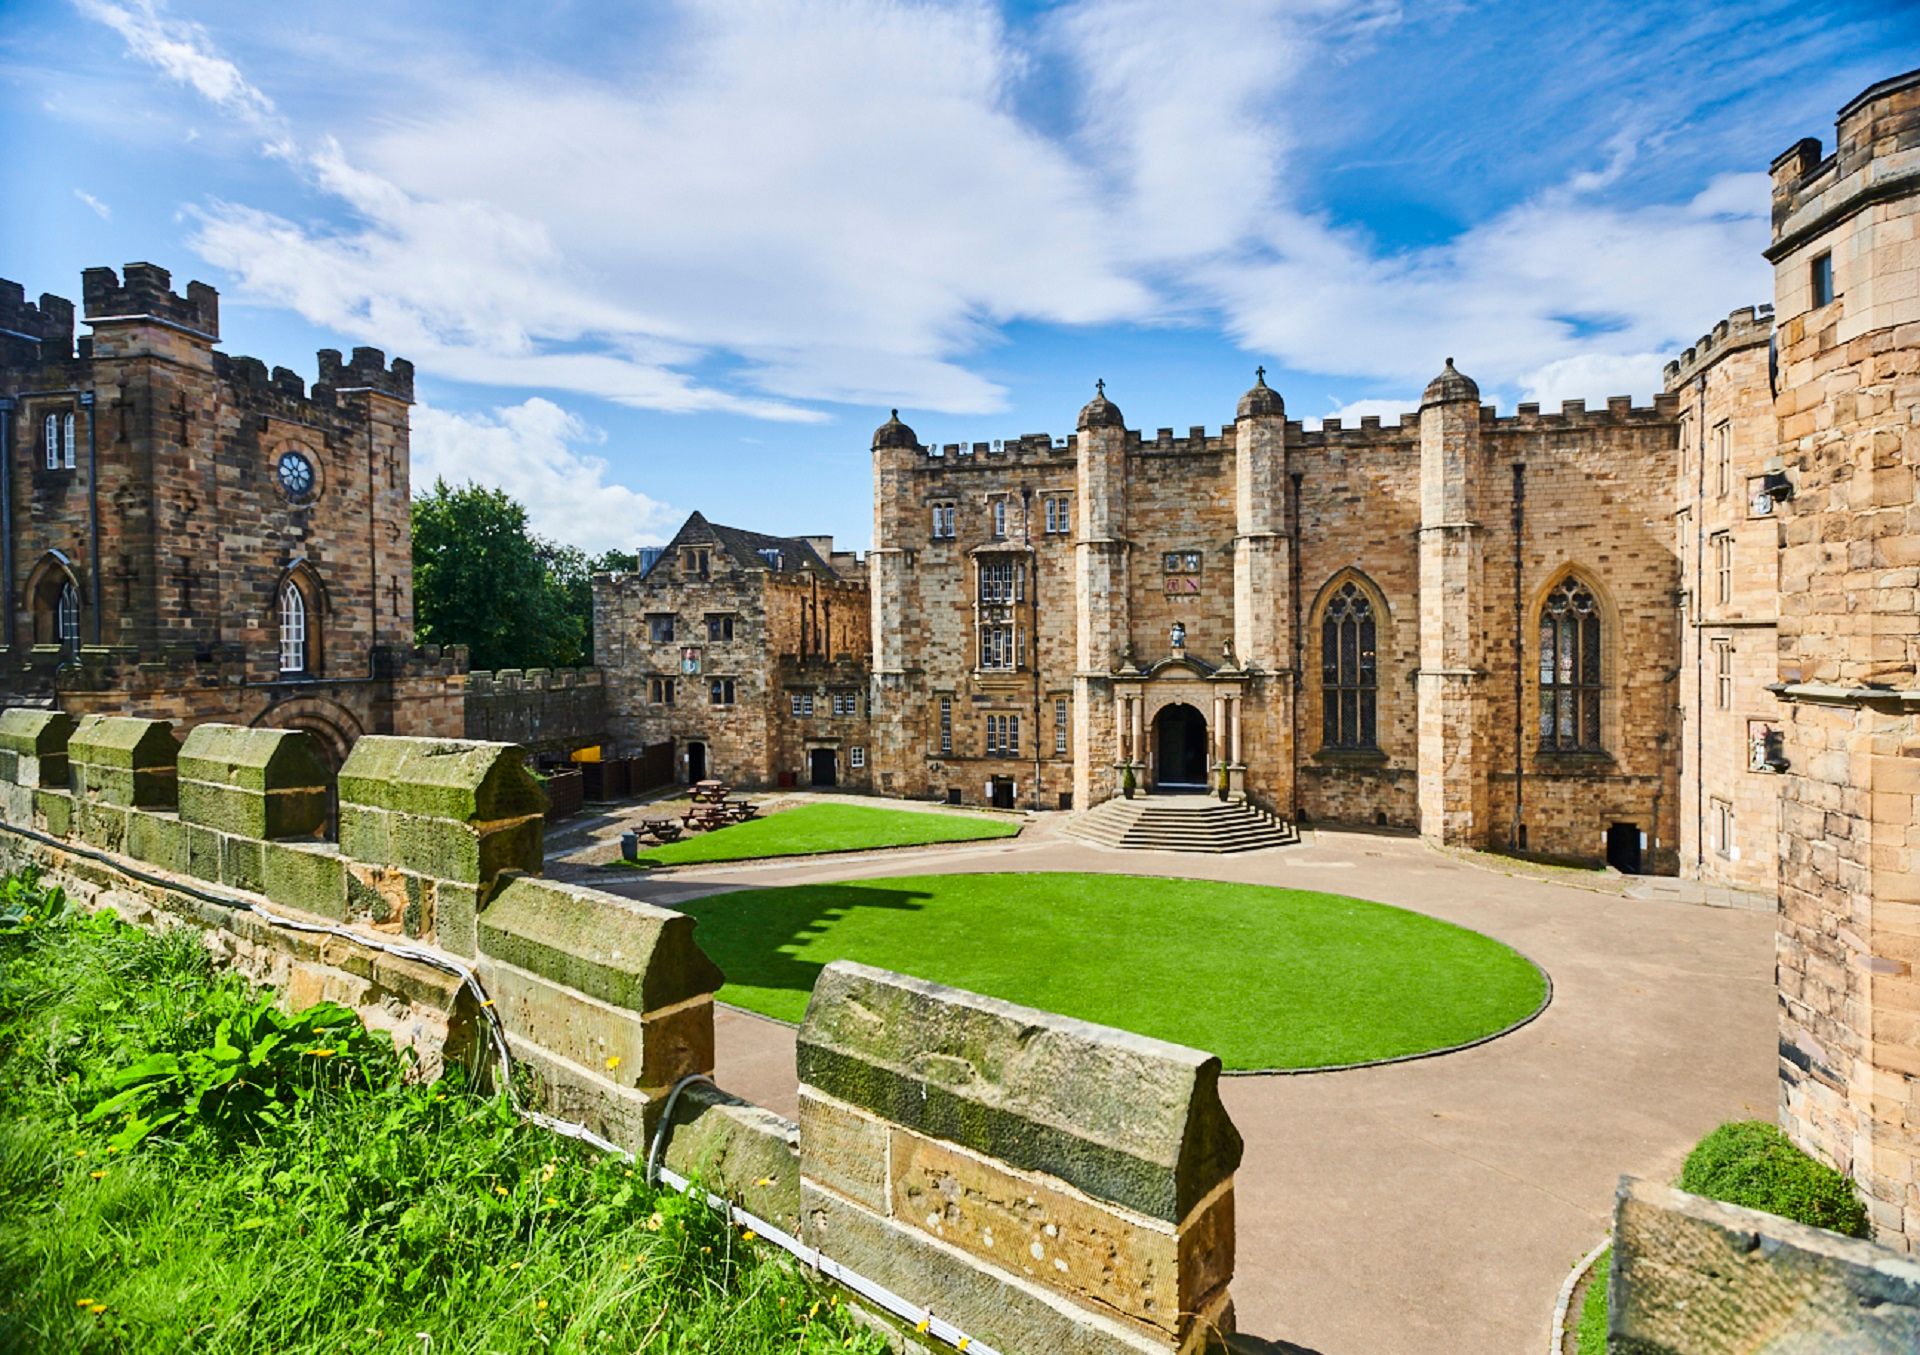 The Courtyard of Durham Castle.